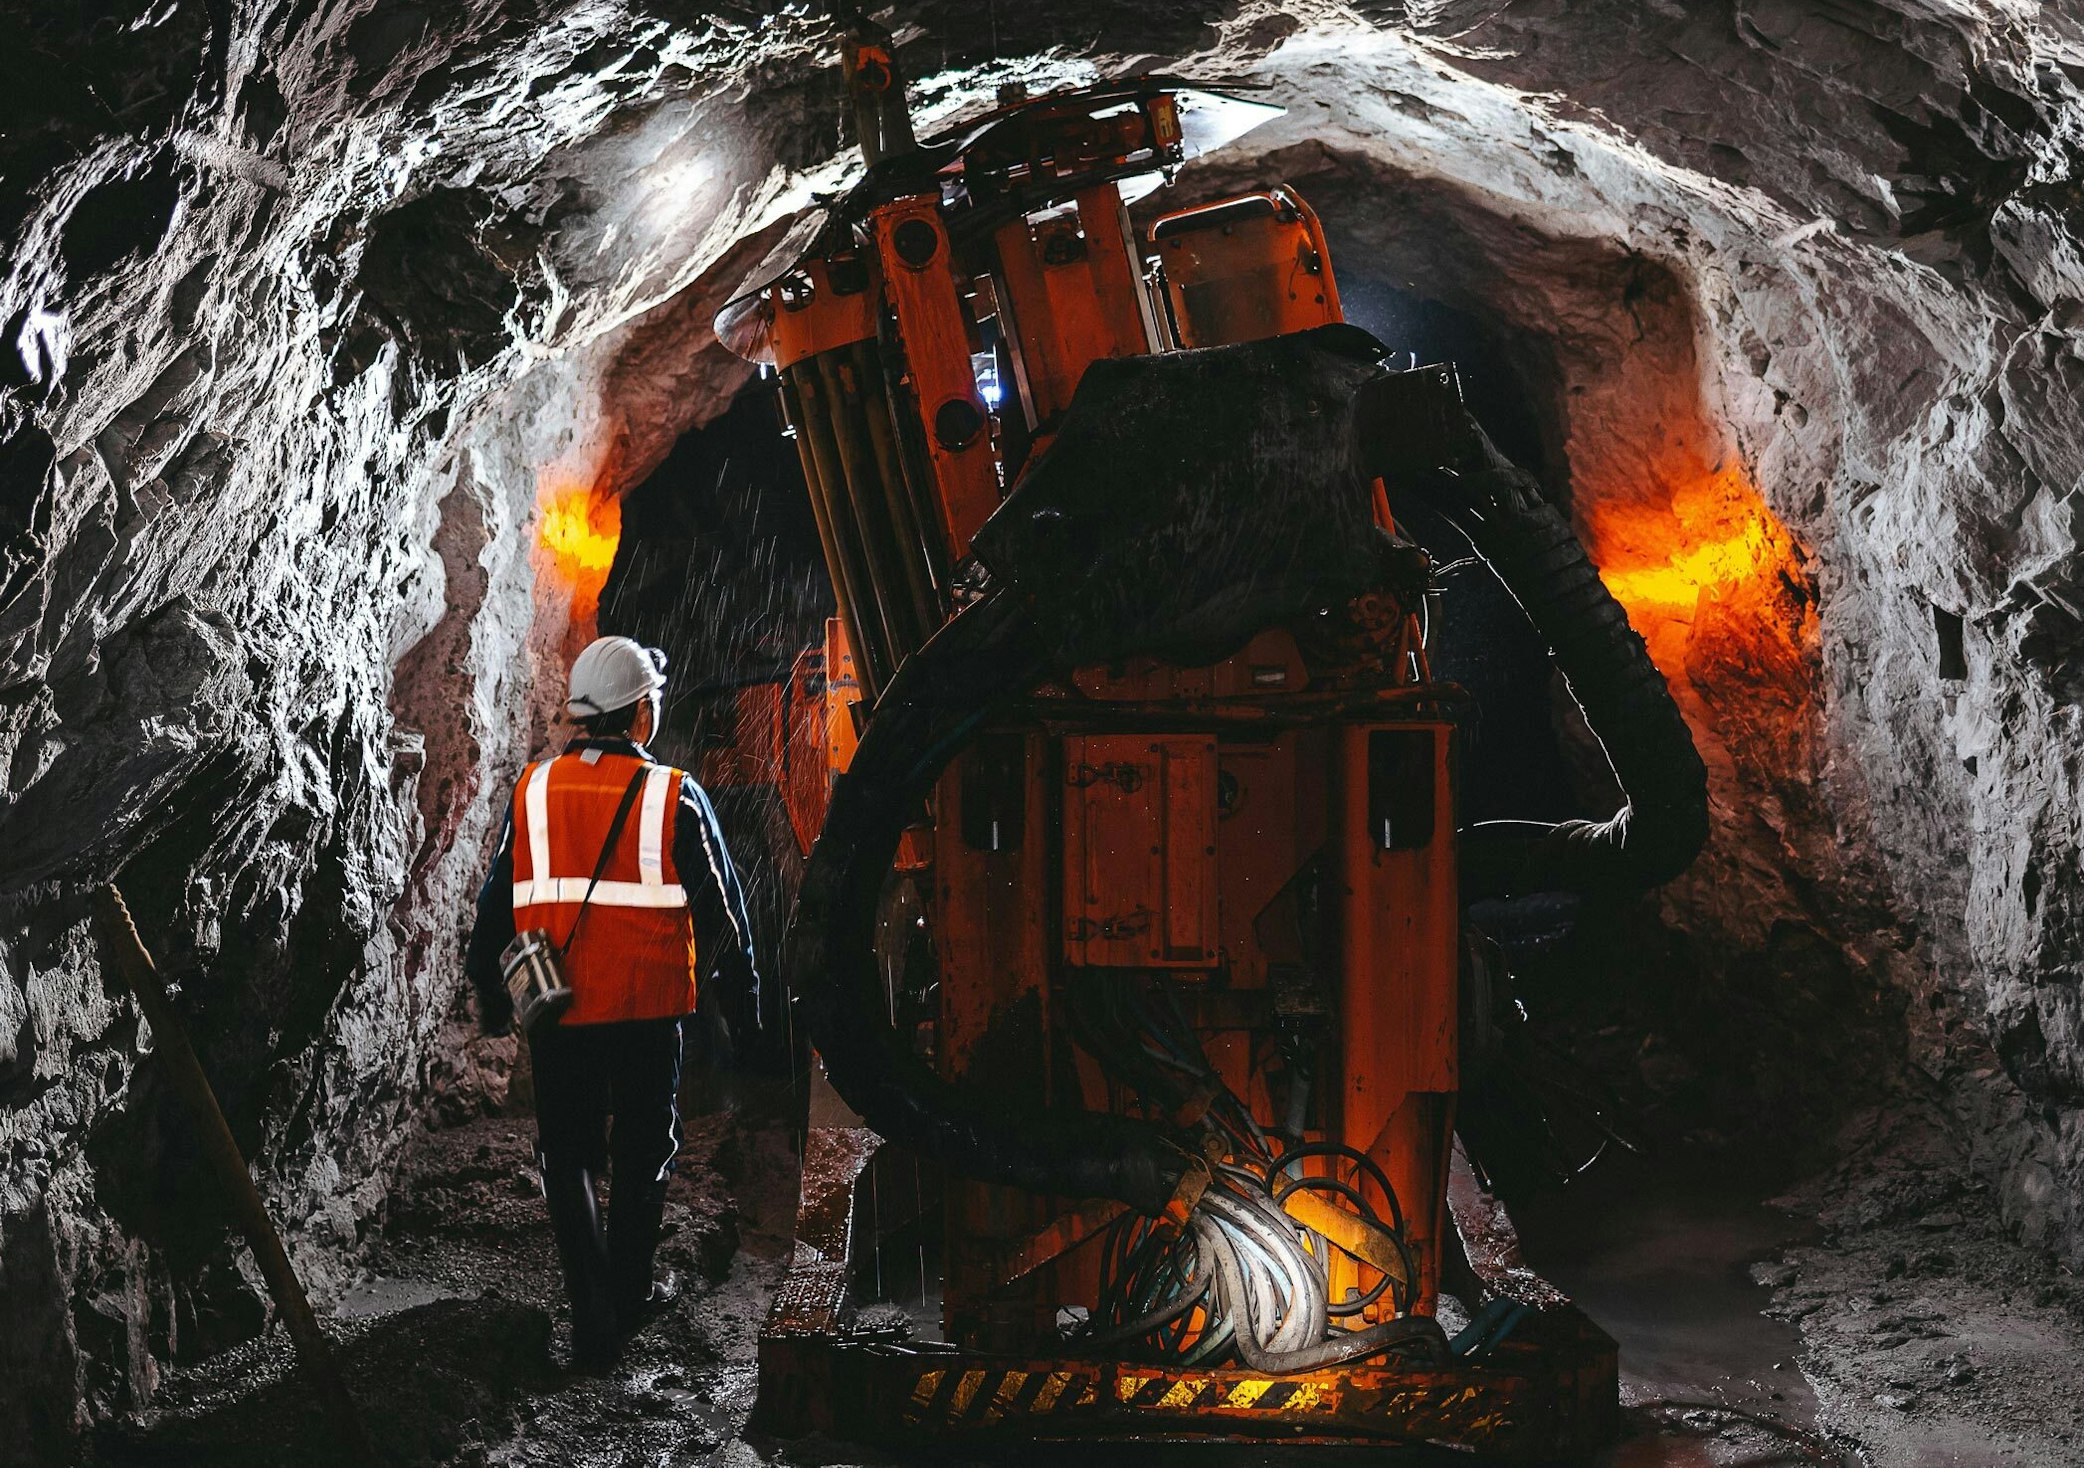 Mining image with worker